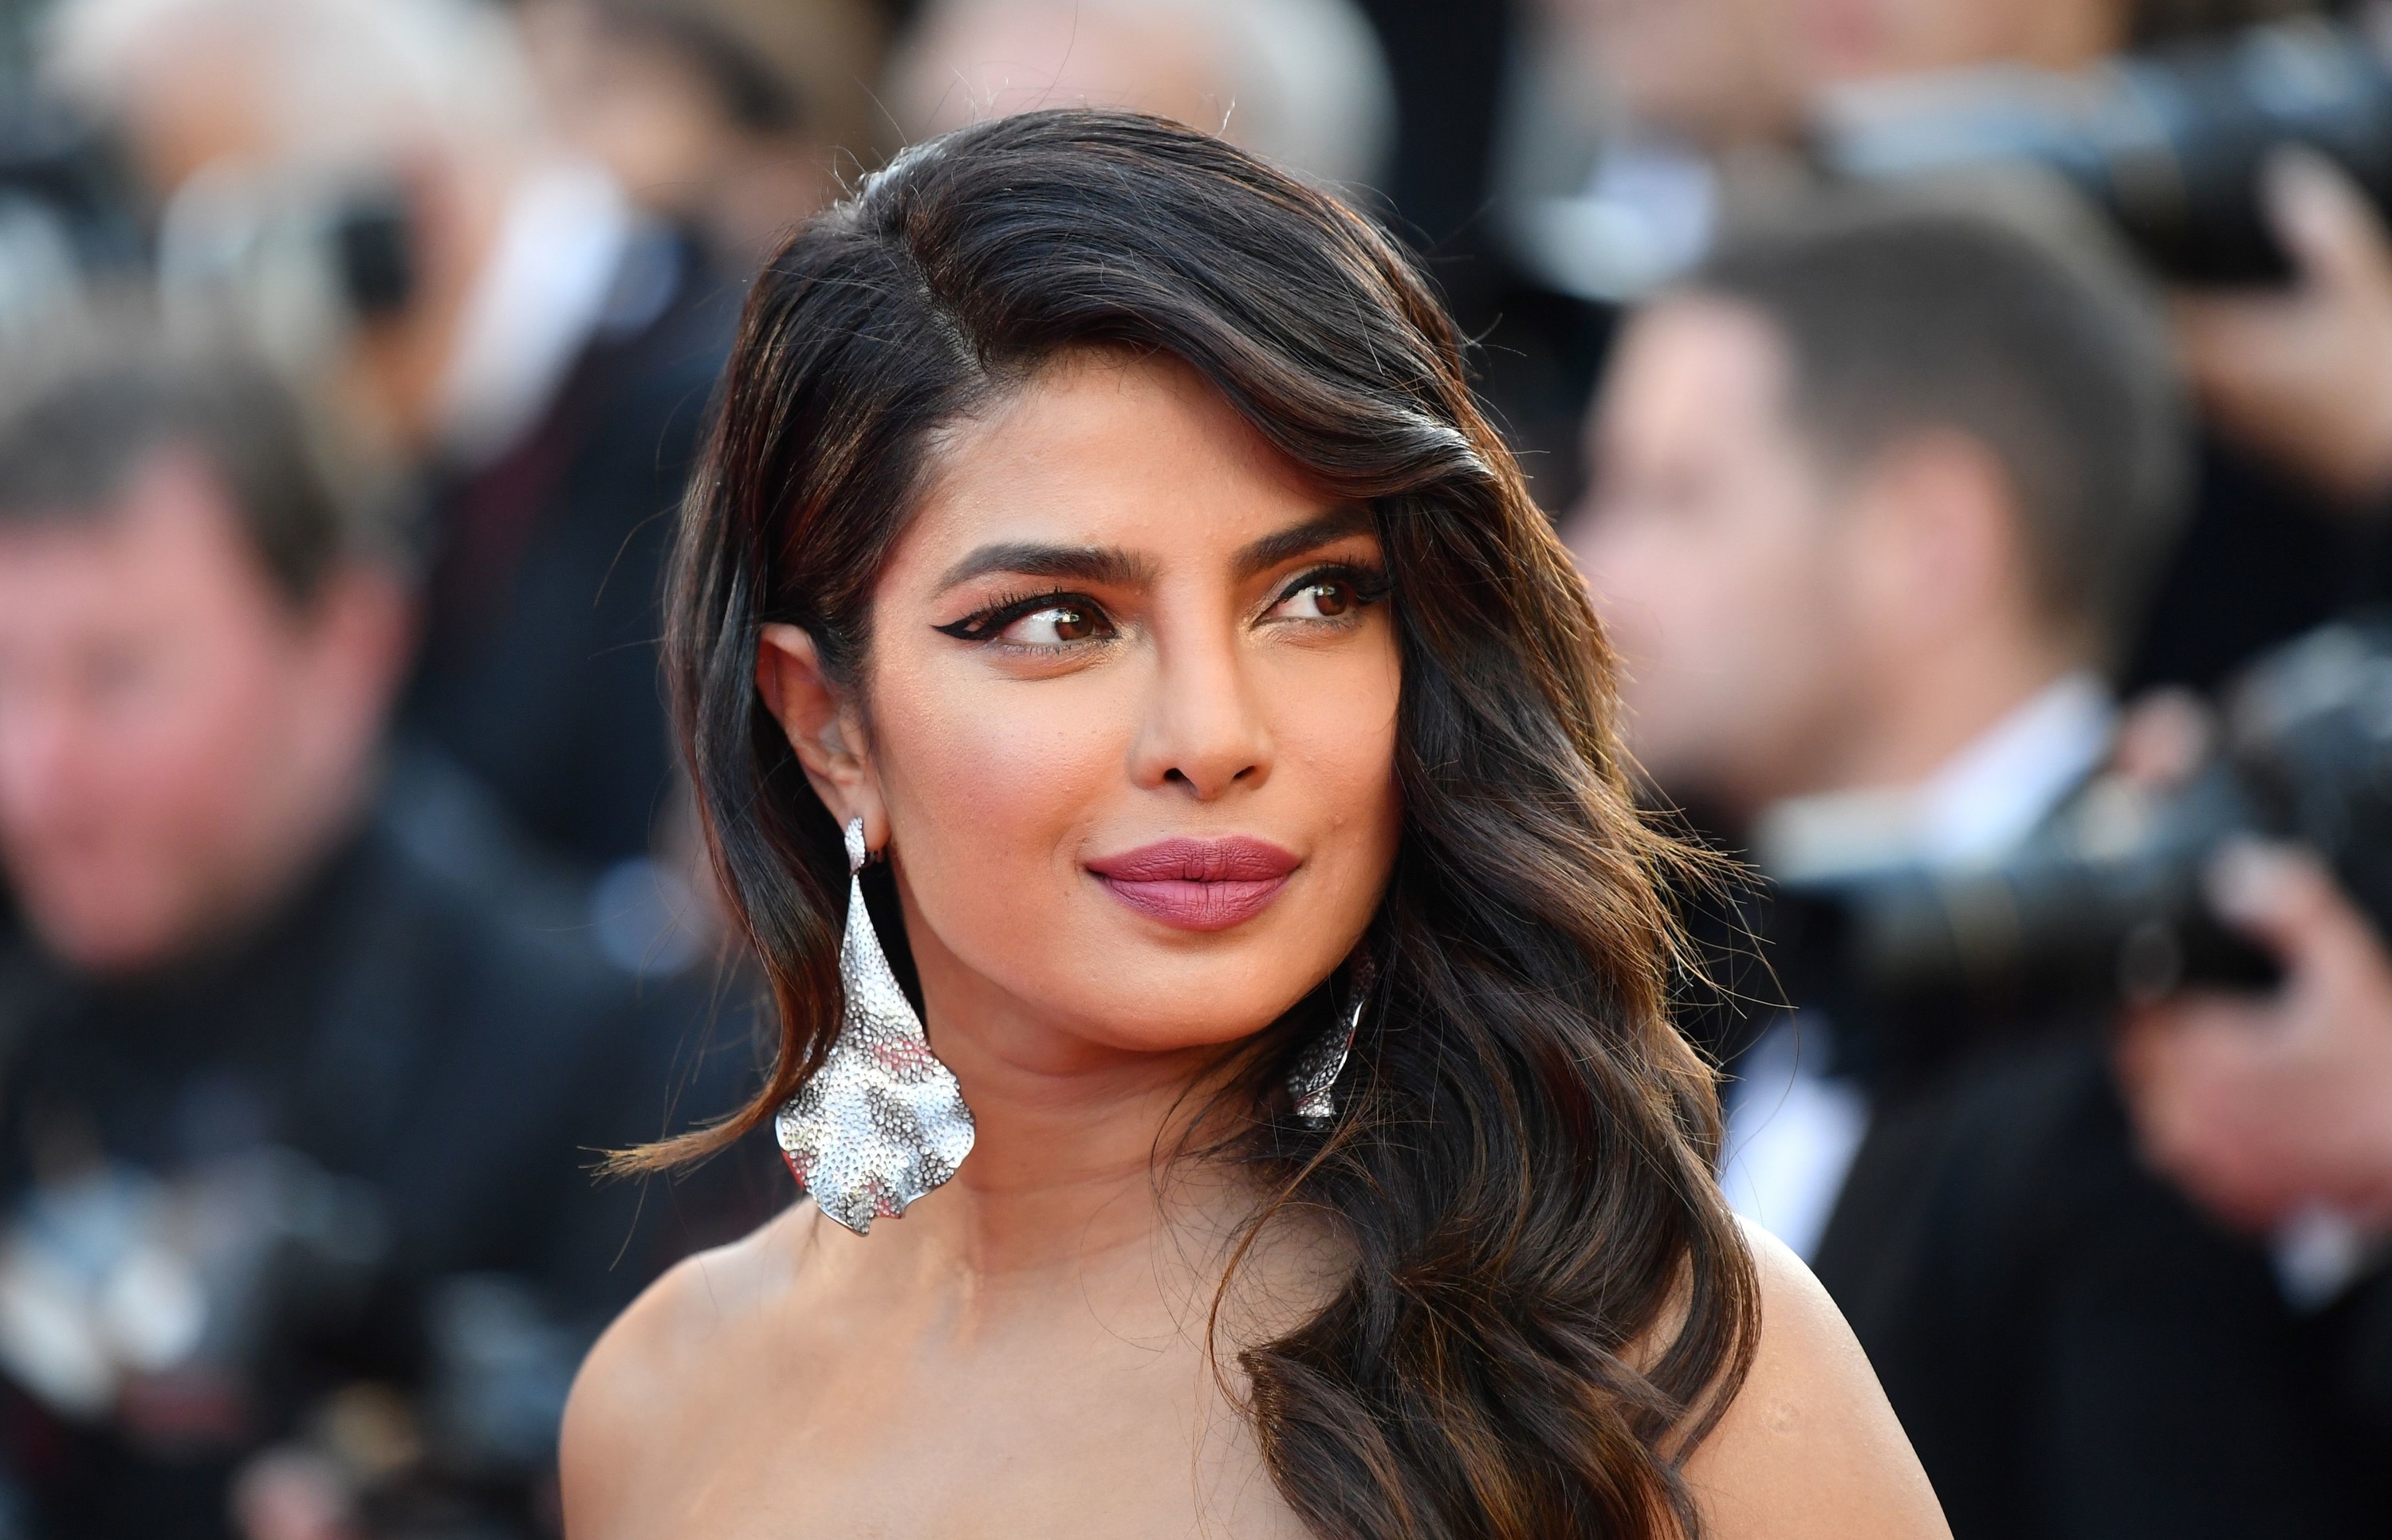 Priyanka looking to the side at a red carpet event